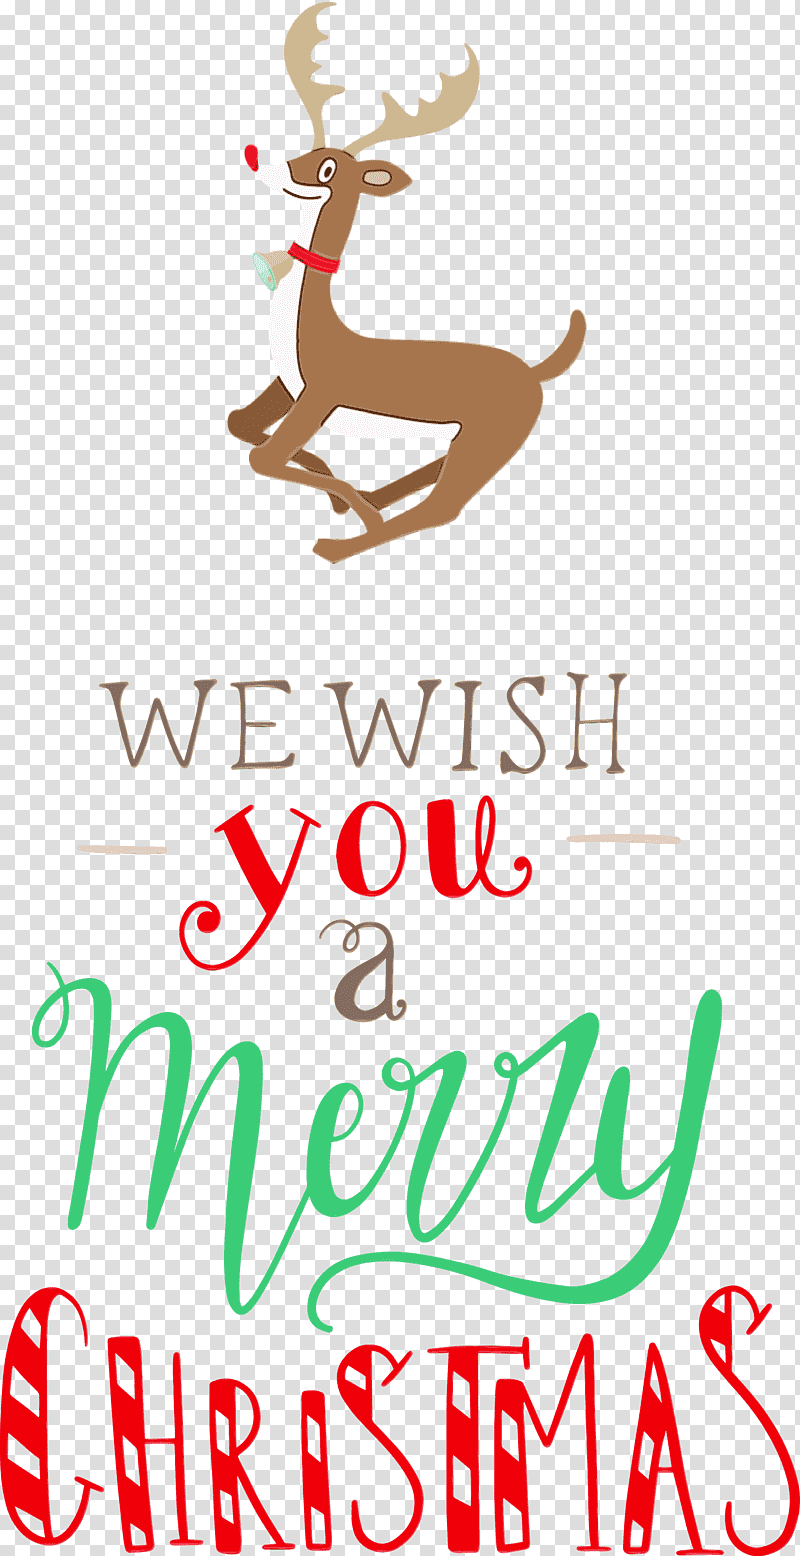 Christmas Day, Merry Christmas, We Wish You A Merry Christmas, Watercolor, Paint, Wet Ink, Christmas Decoration transparent background PNG clipart